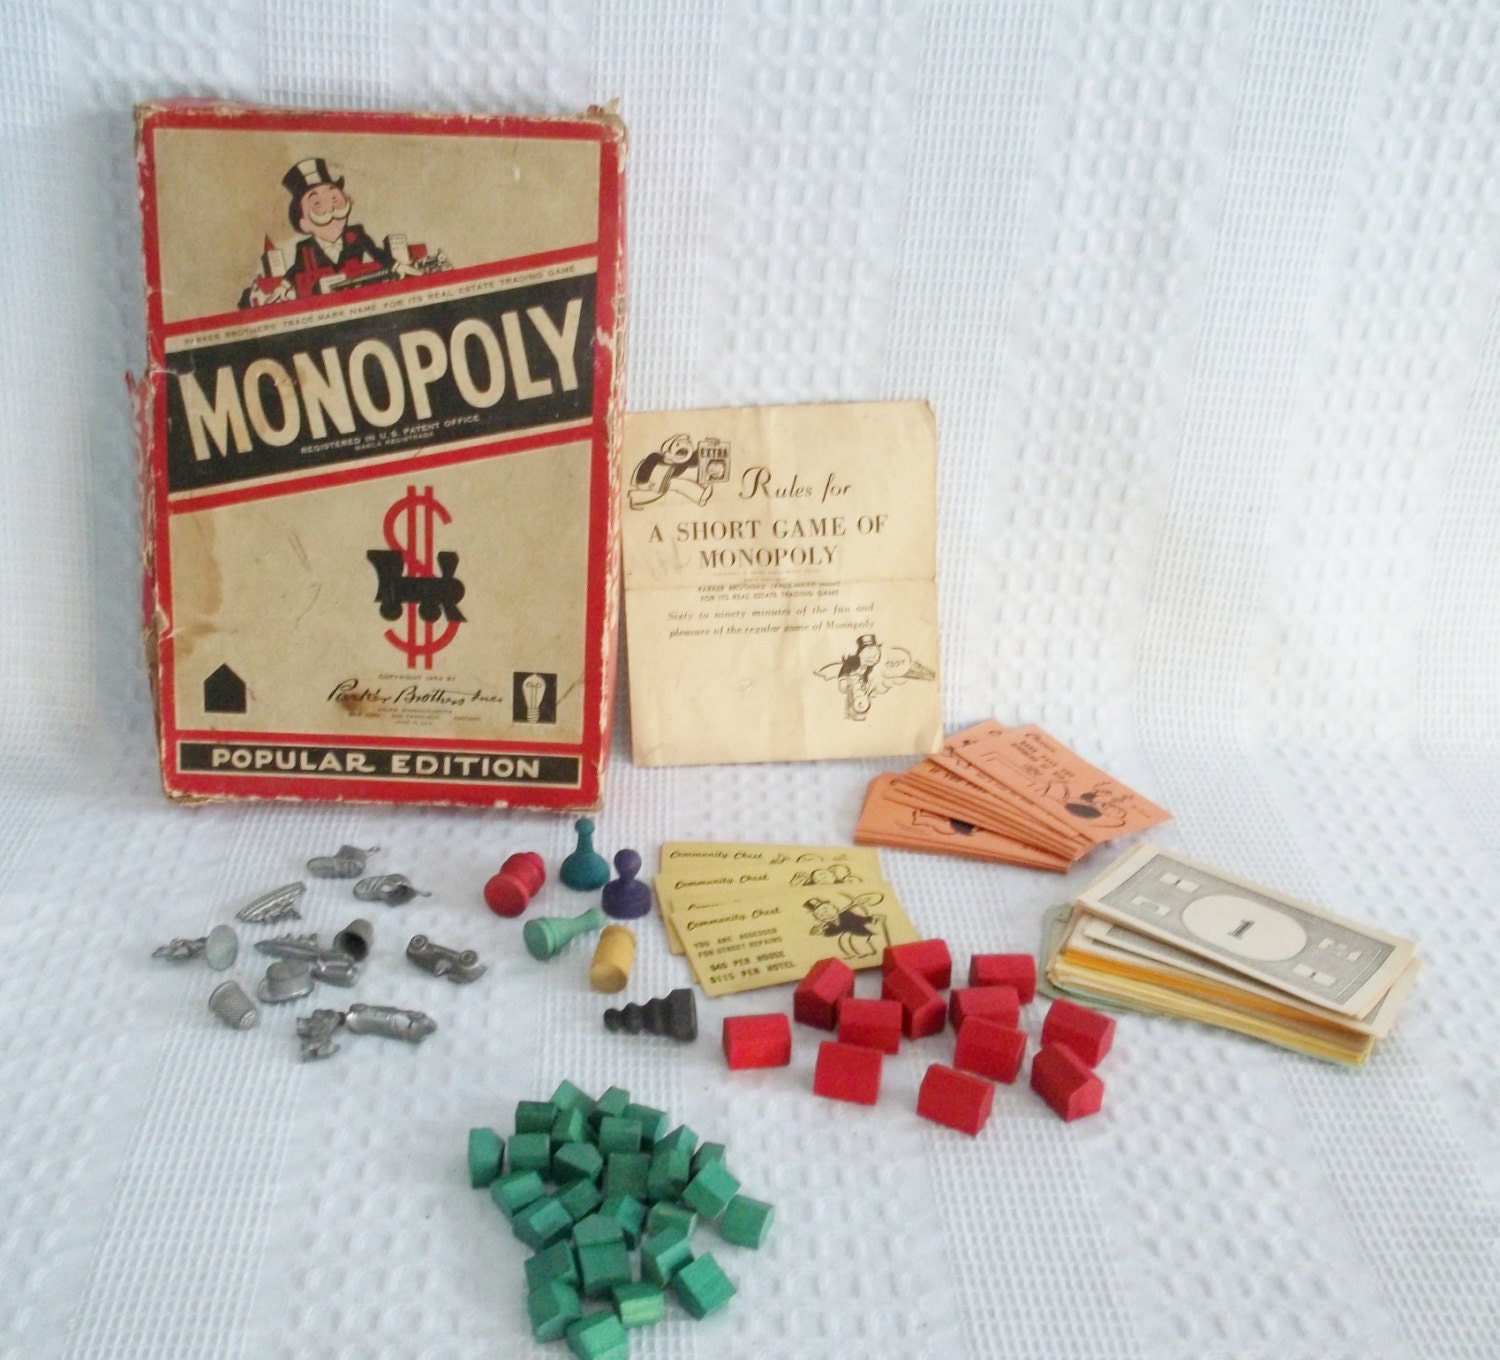 Monopoly wooden pieces